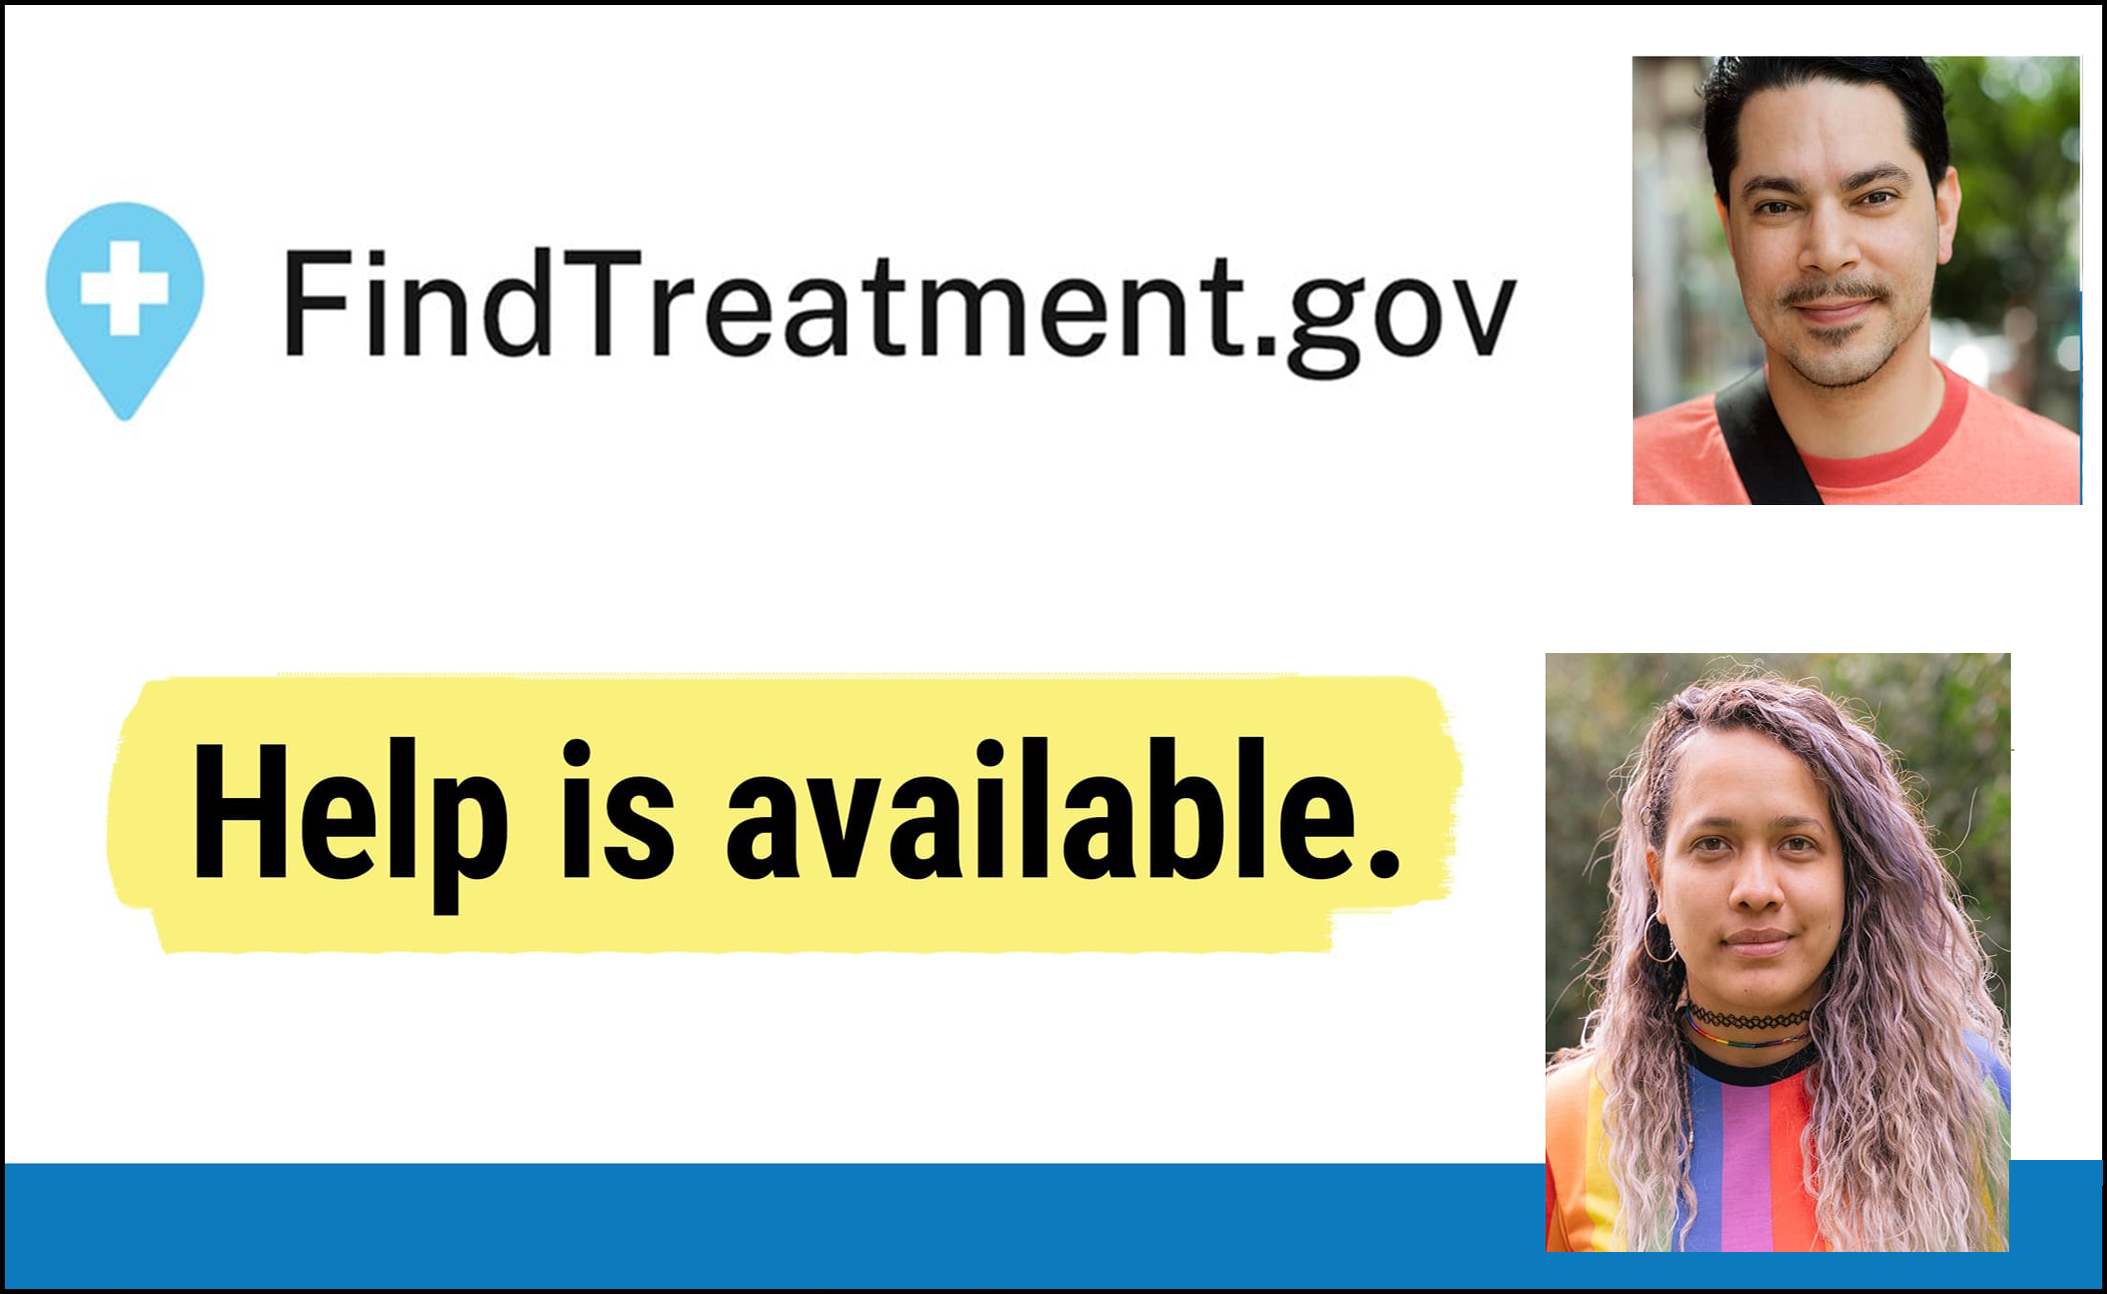 Find Treament.gov. Help is available.